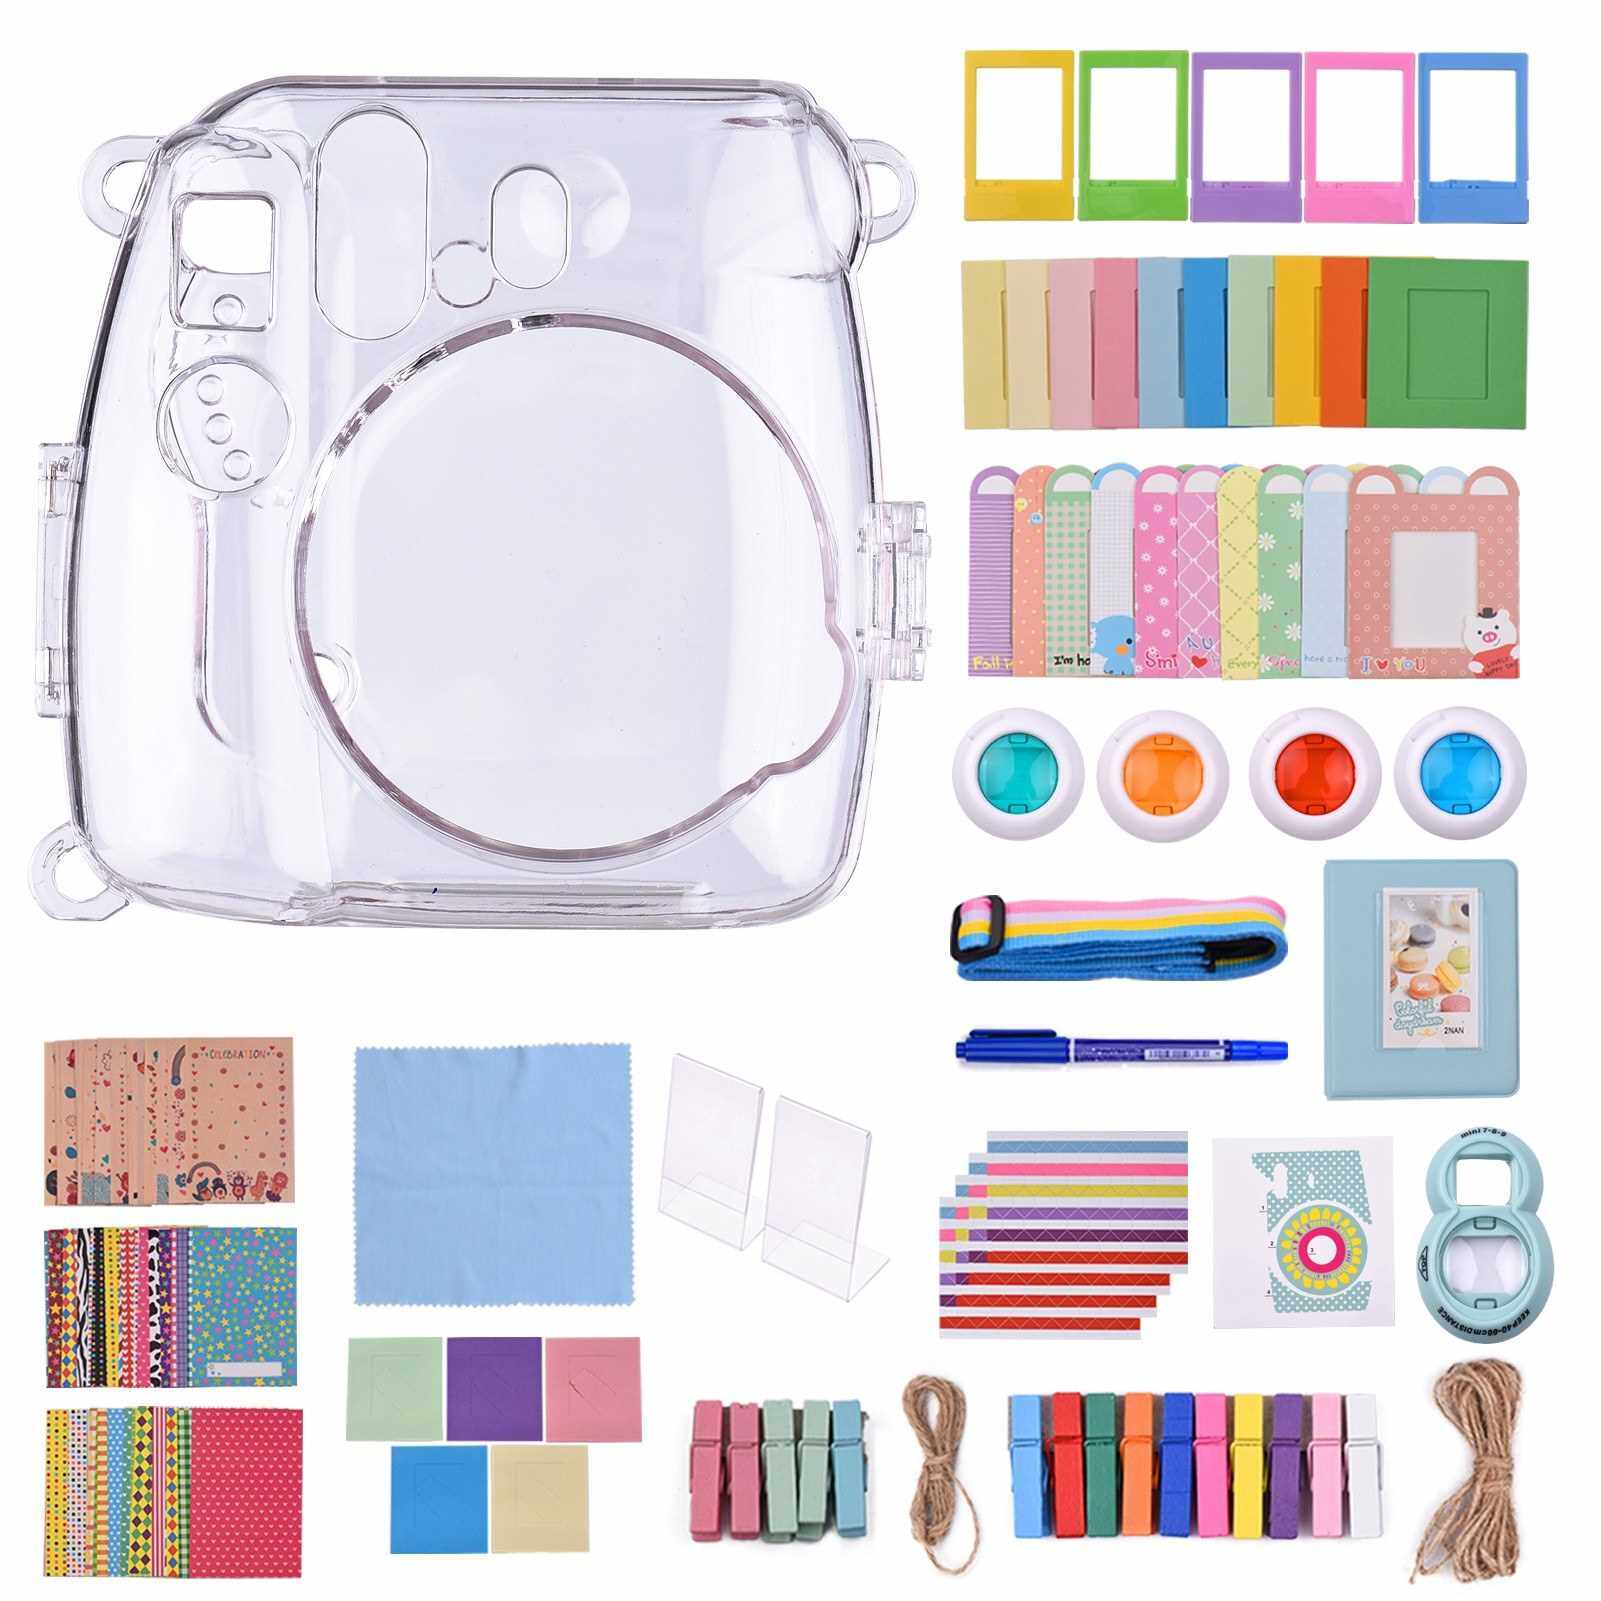 18-in-1 Instant Camera Accessories Kit Replacement for Fujifilm Instax Mini 8/9 Instant Film Camera with Case/ Album/ Selfie Mirror/ Stickers/ Frames/ Lens Filter/ Lanyard and More (Standard)